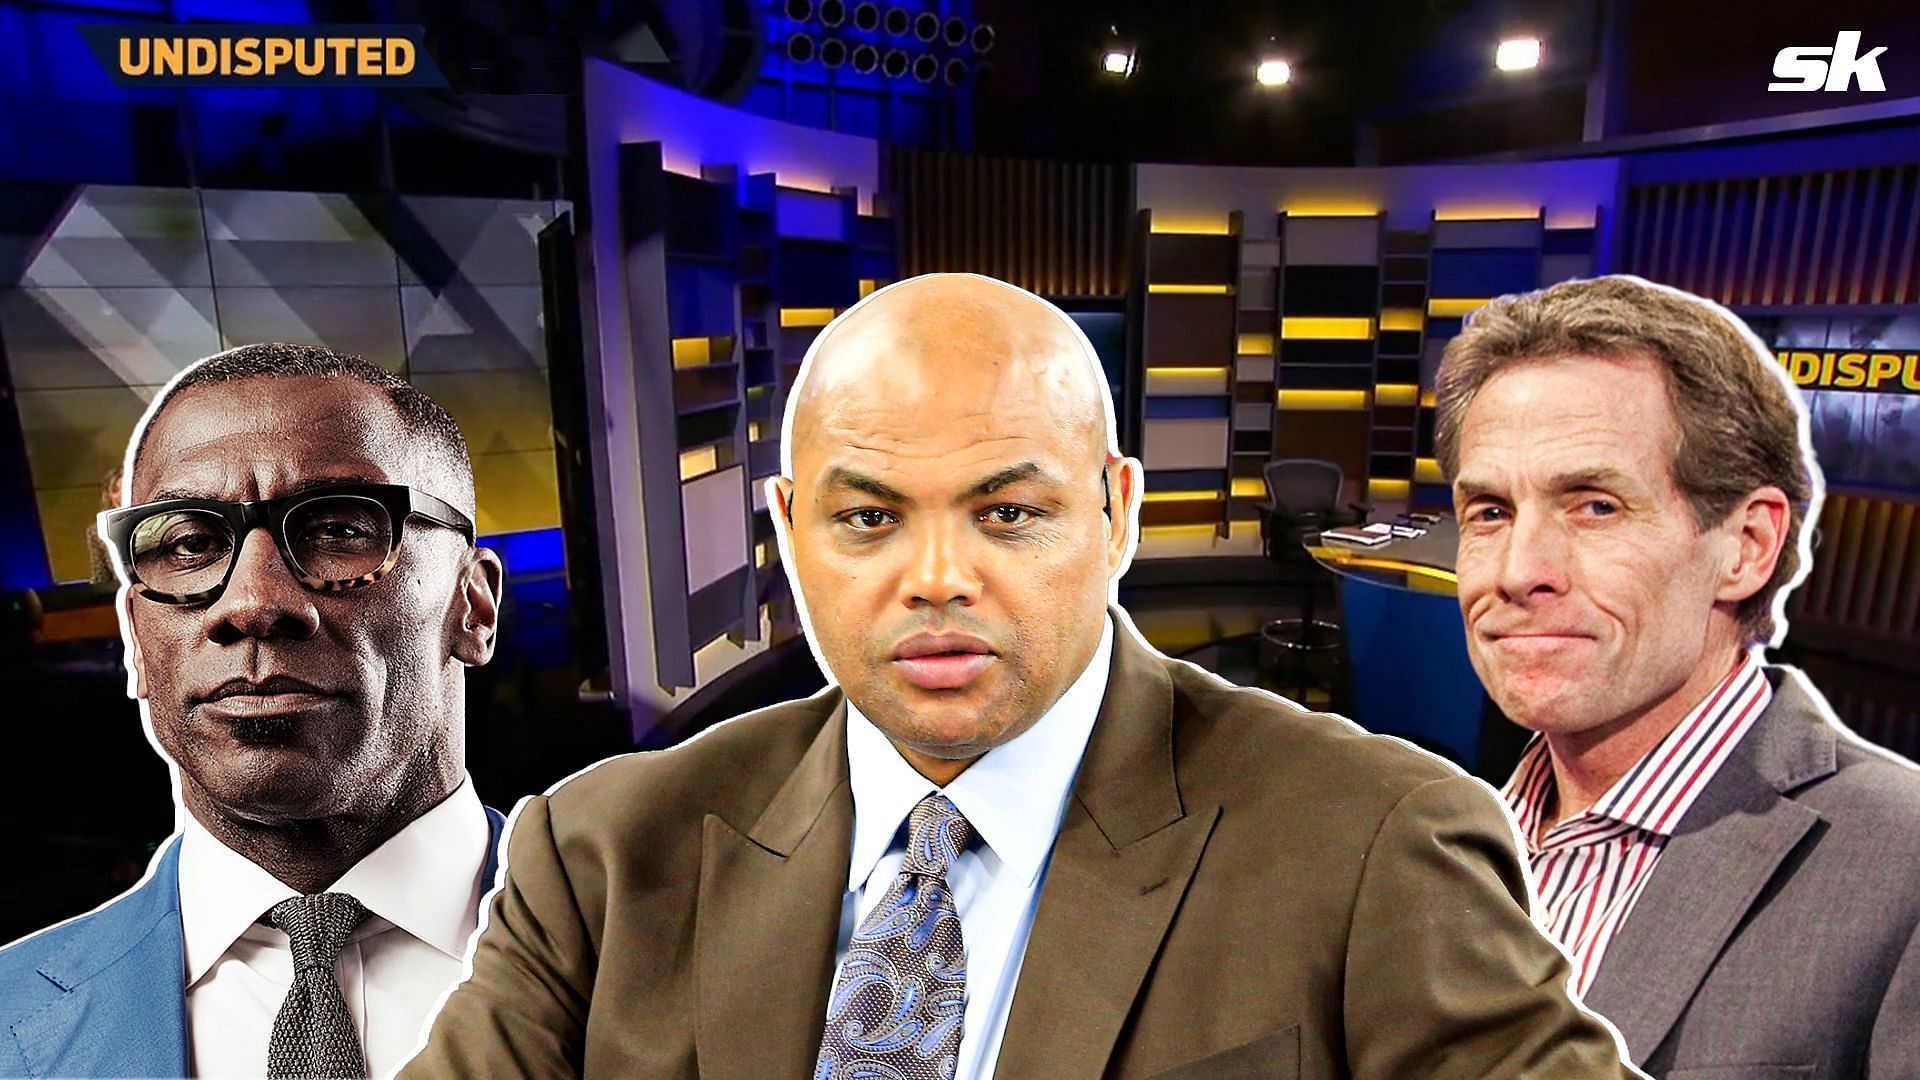 Skip Bayless wants Charles Barkley to join 